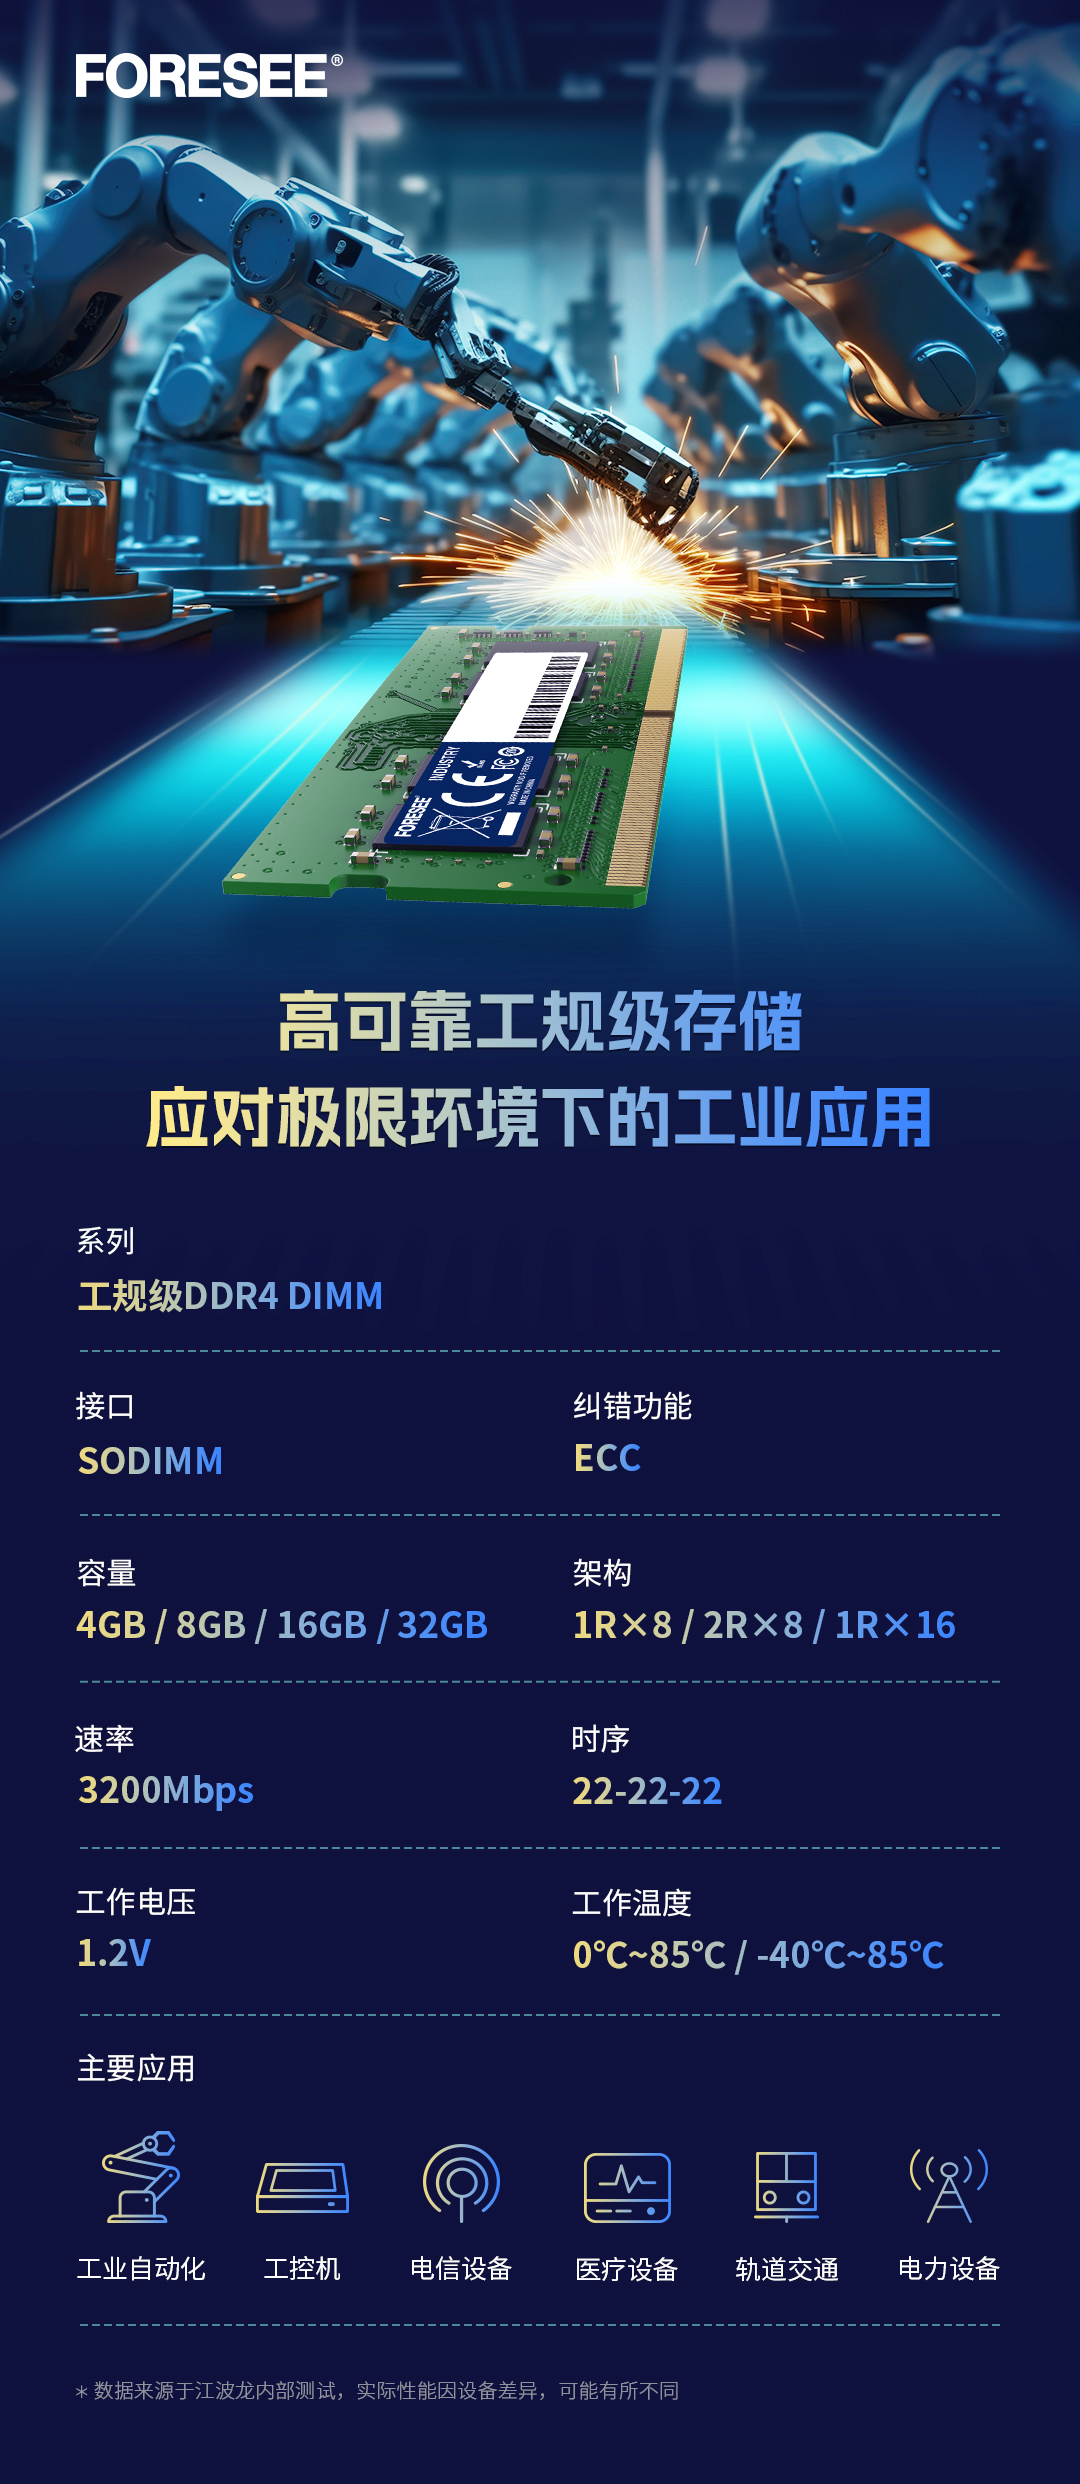 FORESEE全新工規級DDR4 SODIMM，高可靠性助力工業自動化數據存儲